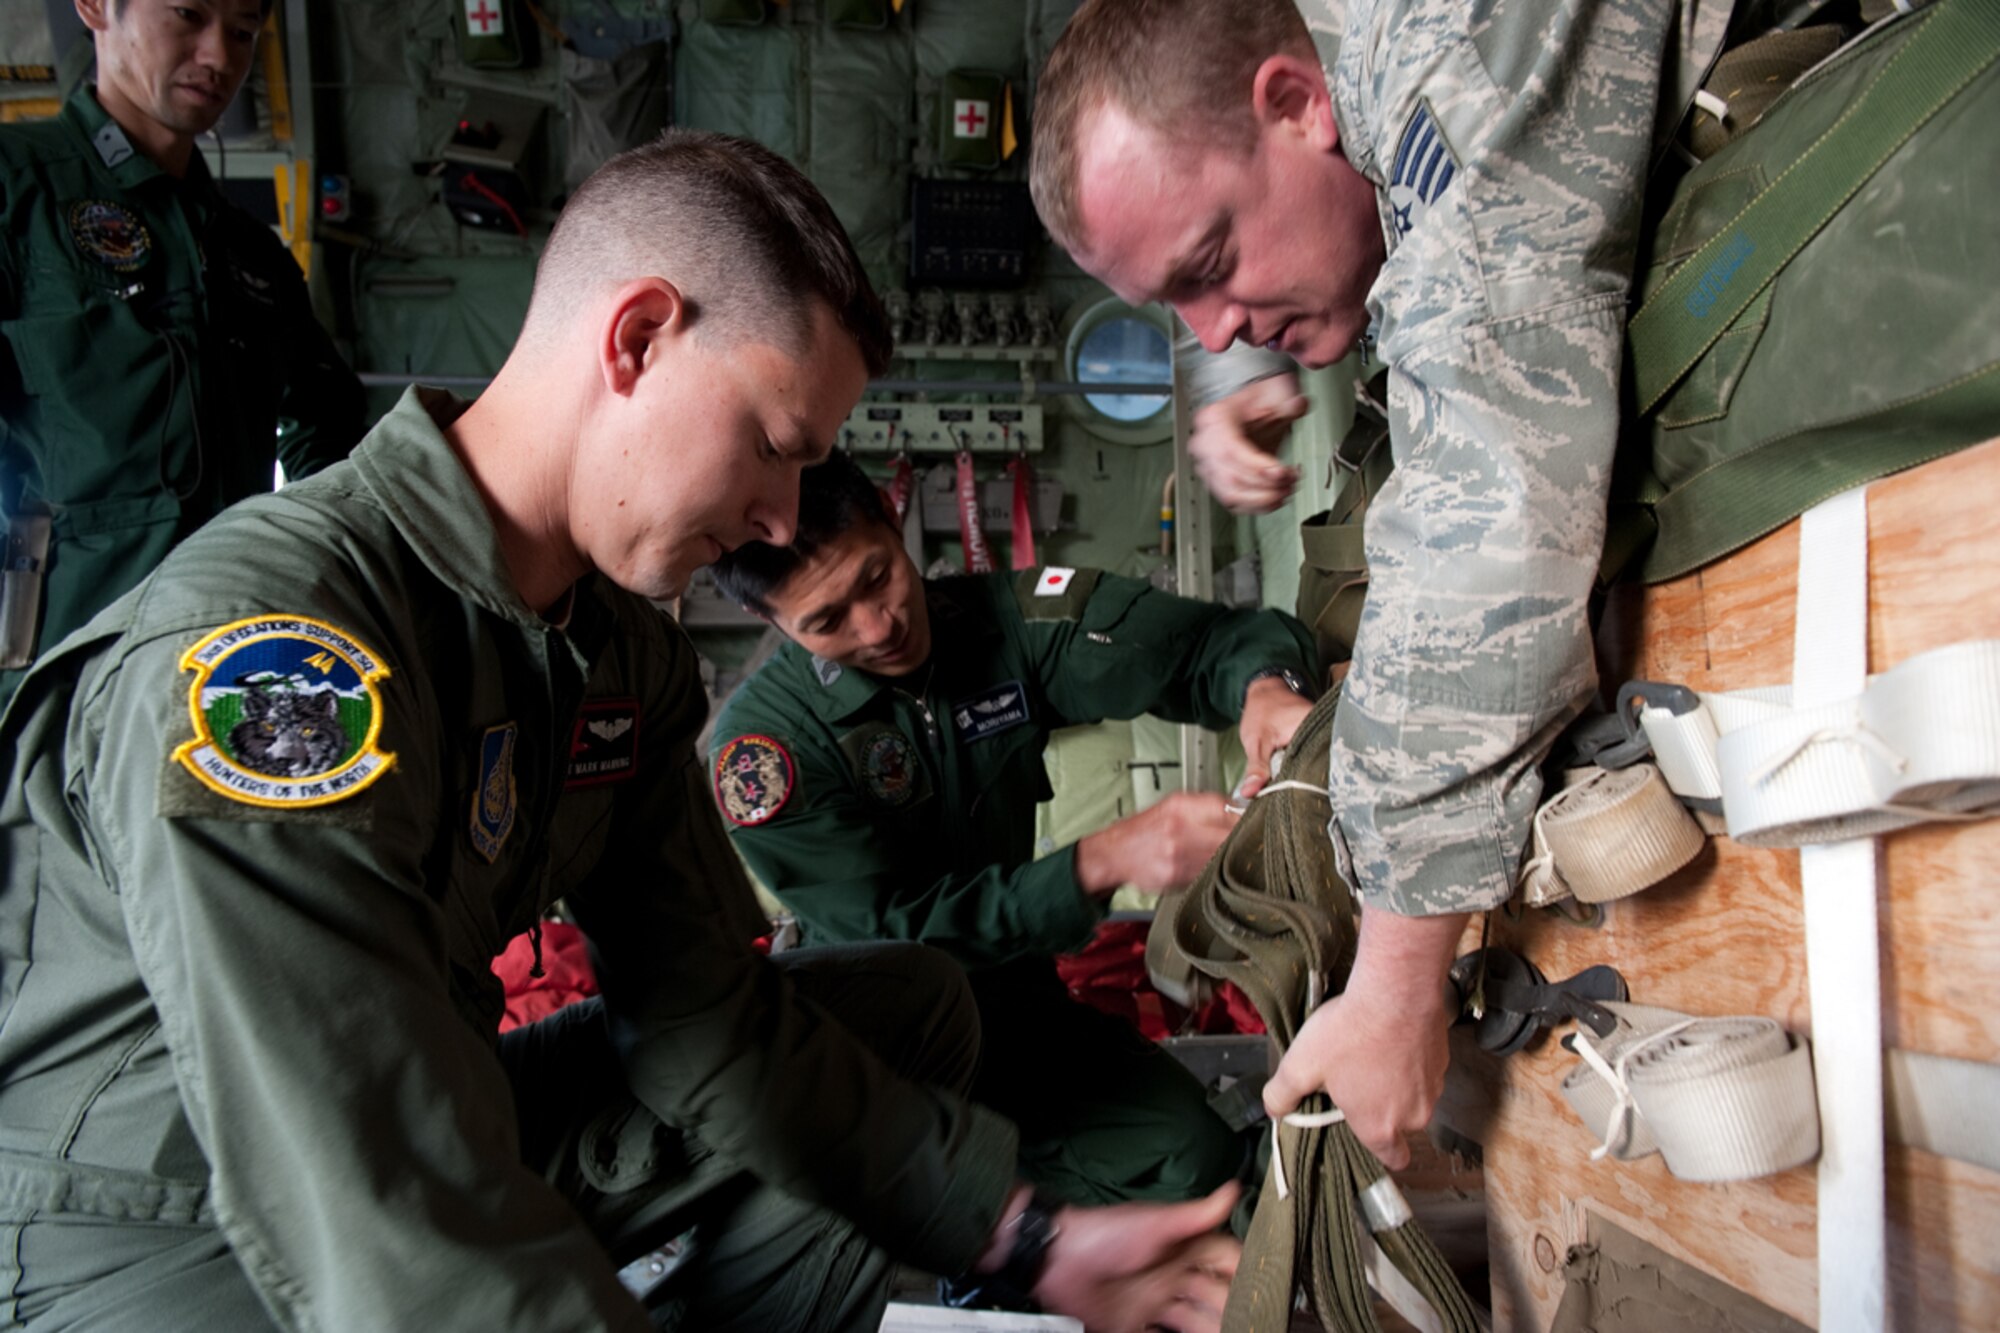 U.S. Air Force Staff Sgt. Mark Manning, front left, and TSgt Michael Dunkelberger, front right, examine the air drop system with members of the Japanese Air Self Defense Force during pre-flight inspections for the Japanese C-130 Hercules during Red Flag - Alaska on the flight line of Joint Base Elmendorf-Richardson, Alaska June 19. The C-130 Hercules offers a maximum speed of 600 kilometers an hour with a payload of 19,400 pounds and can be used for air drops. Red-Flag Alaska is designed to strengthen bilateral ties between nations and offers the JASDF the opportunity to improve aerial tactics. (U.S. Air Force photo/Staff Sgt. Robert Barnett)